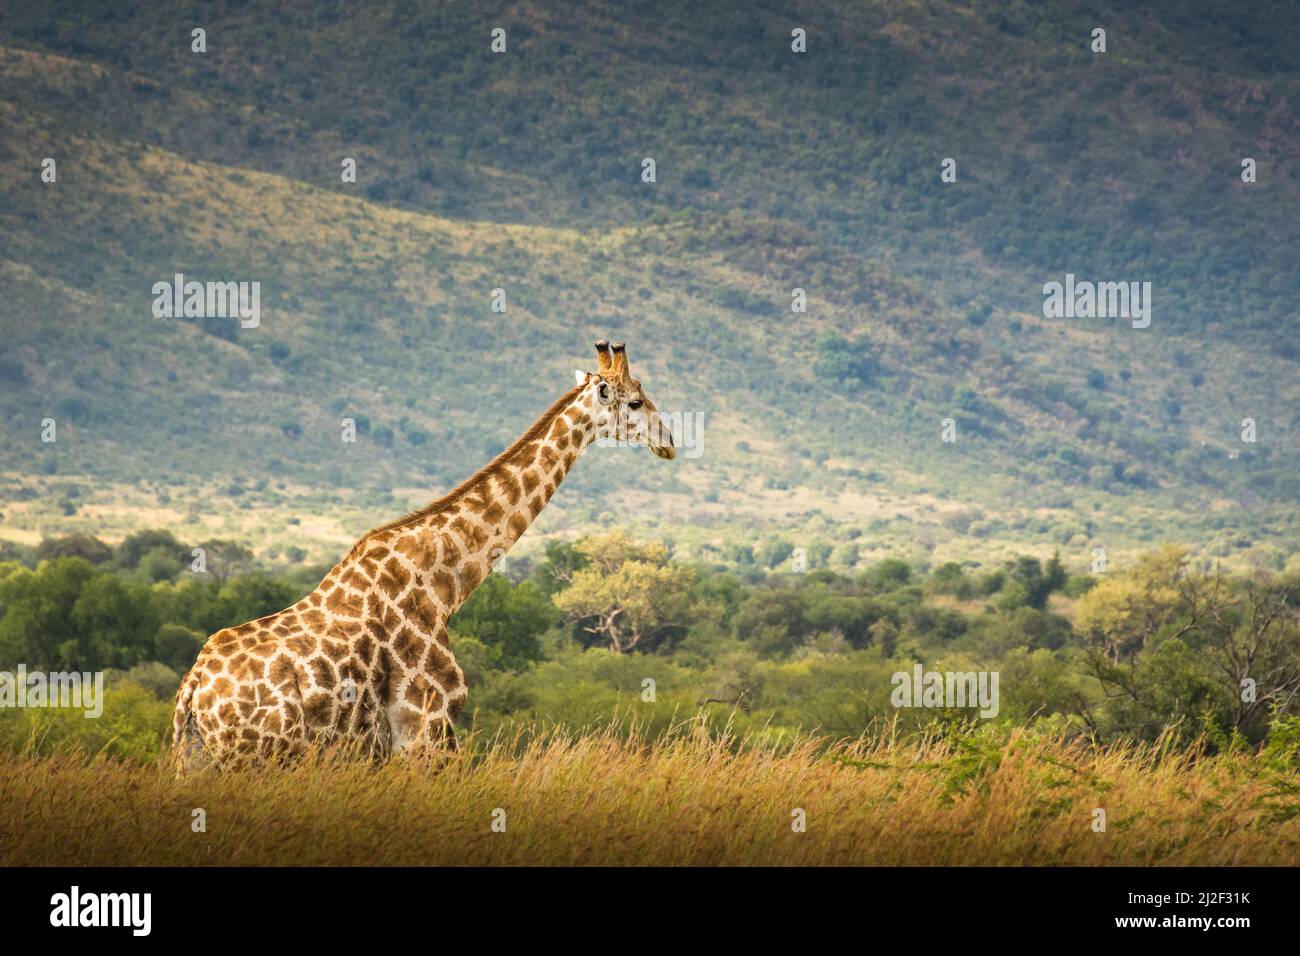 Giraffe walking in the wild in South Africa at sunset. Stock Photo